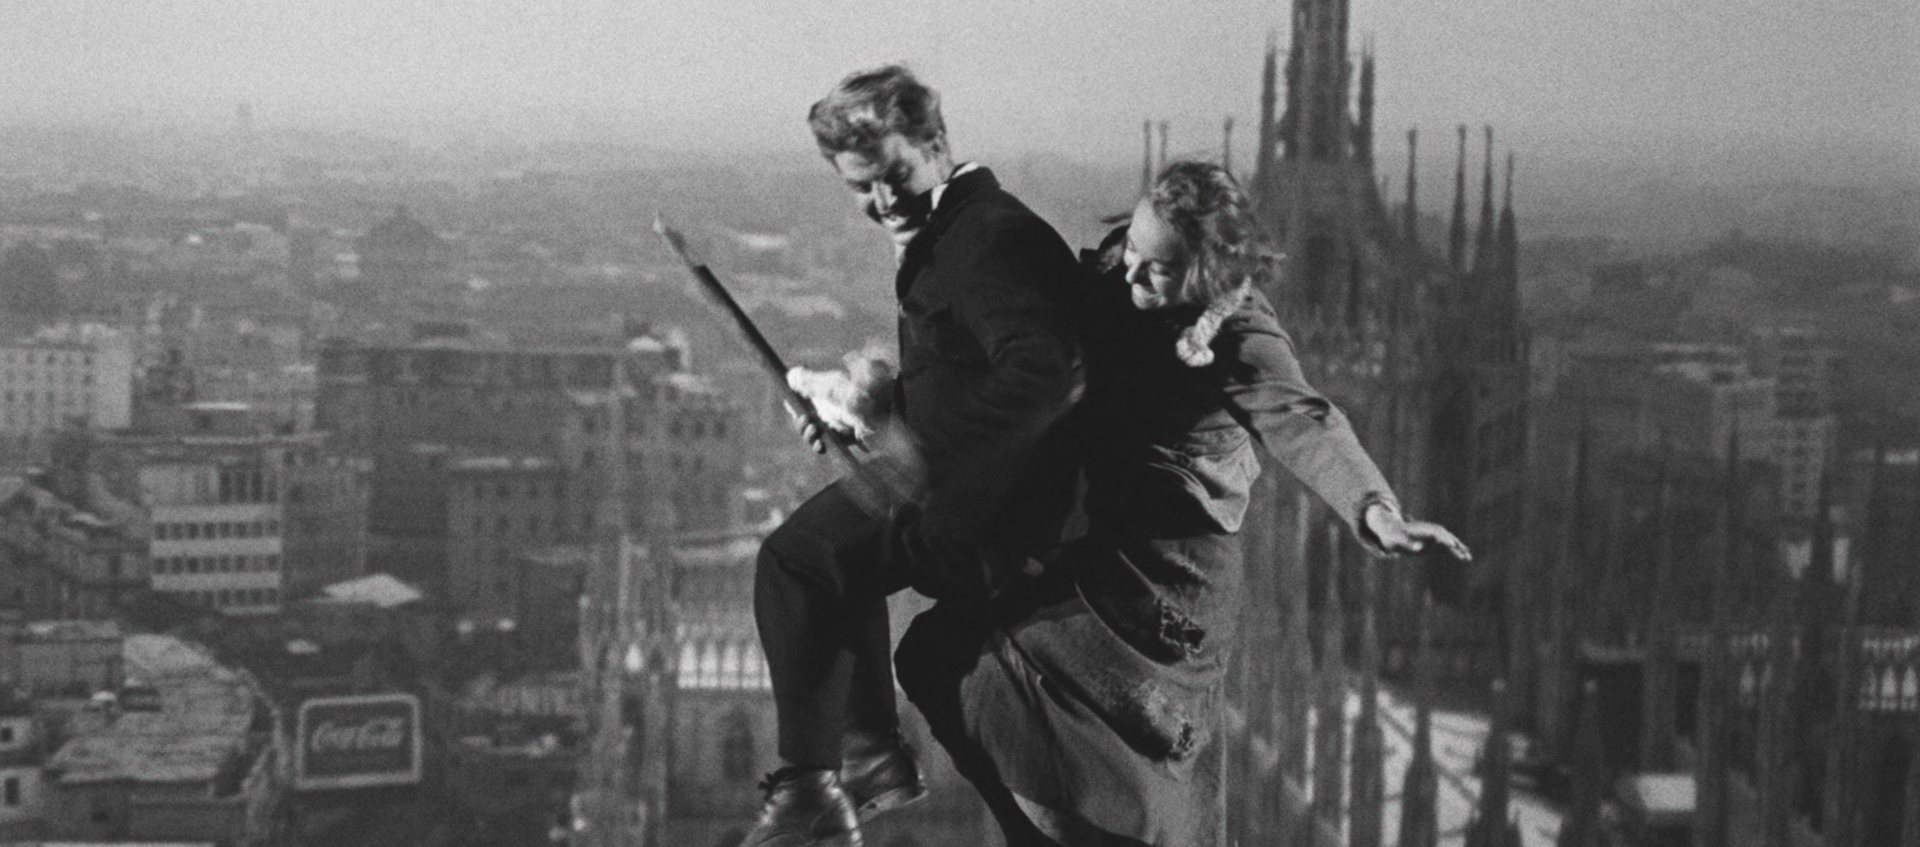 An image of a man and a woman on a broomstick flying above the tops of buildings in a city